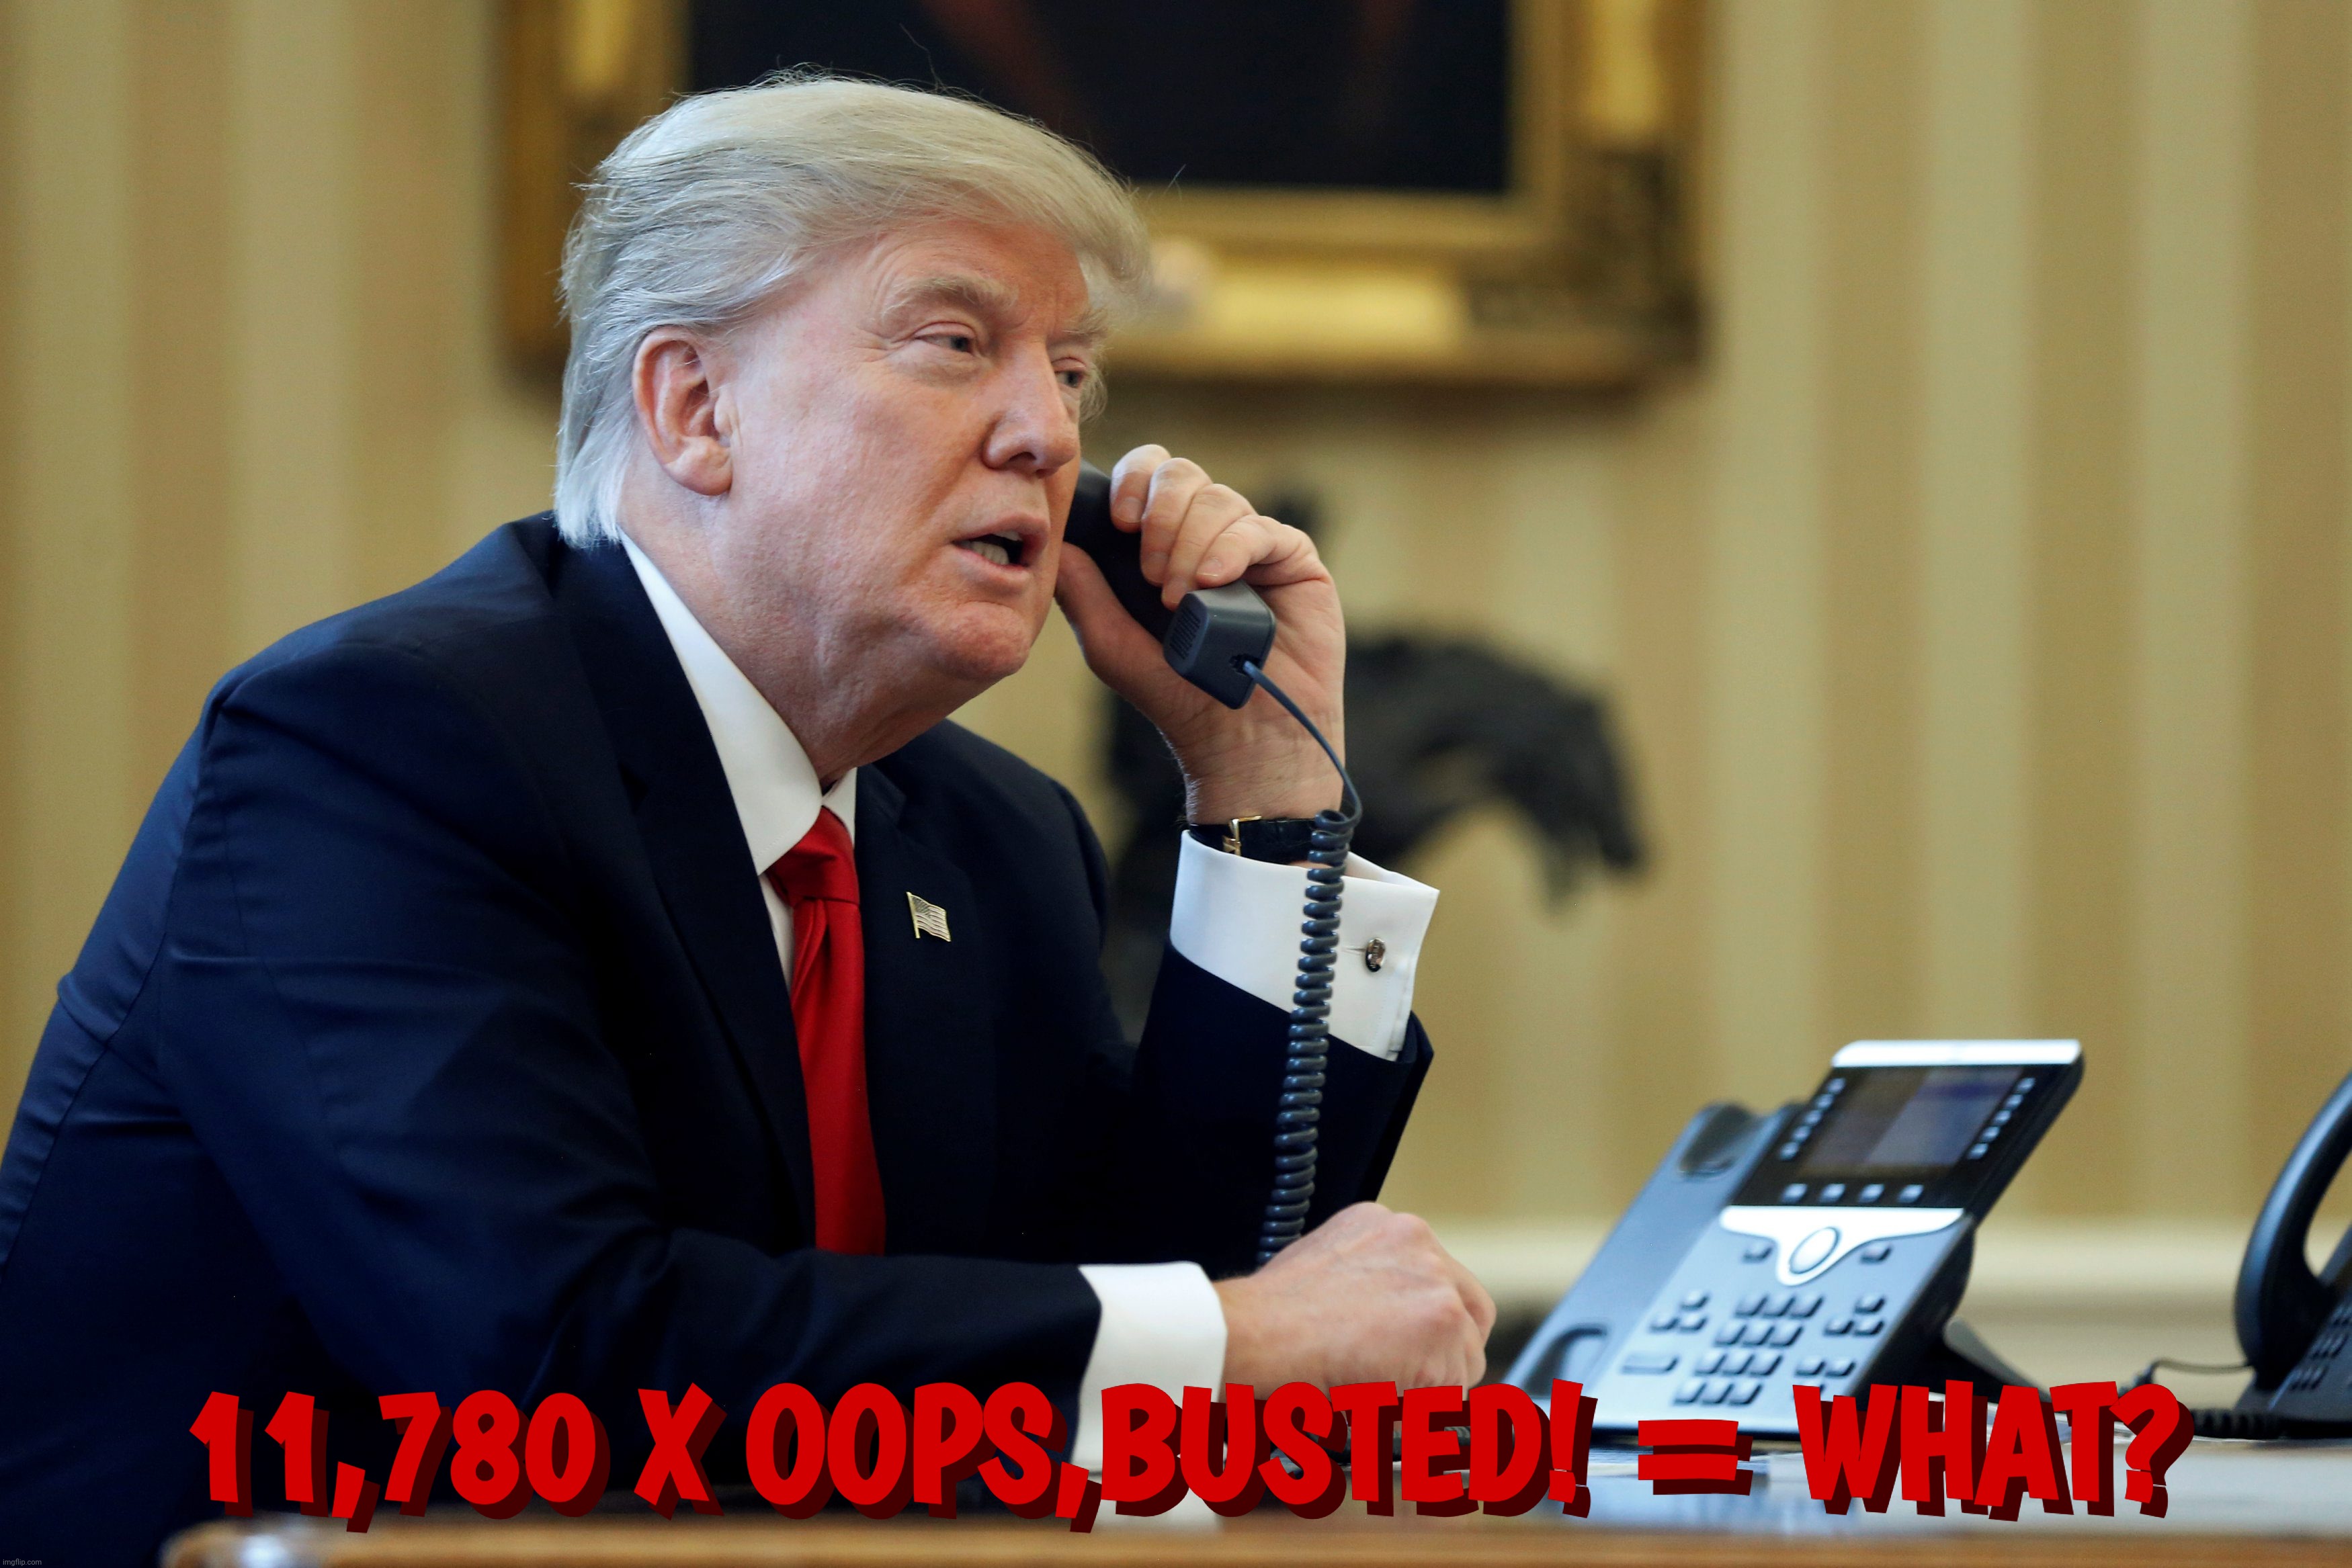 Another 'perfect call' | 11,780 X OOPS,BUSTED! = WHAT? 11,780 X OOPS,BUSTED! = WHAT? | image tagged in donald trump,trump,i just need 11780 votes,steal the vote,georgia on his mind,jan 6 | made w/ Imgflip meme maker